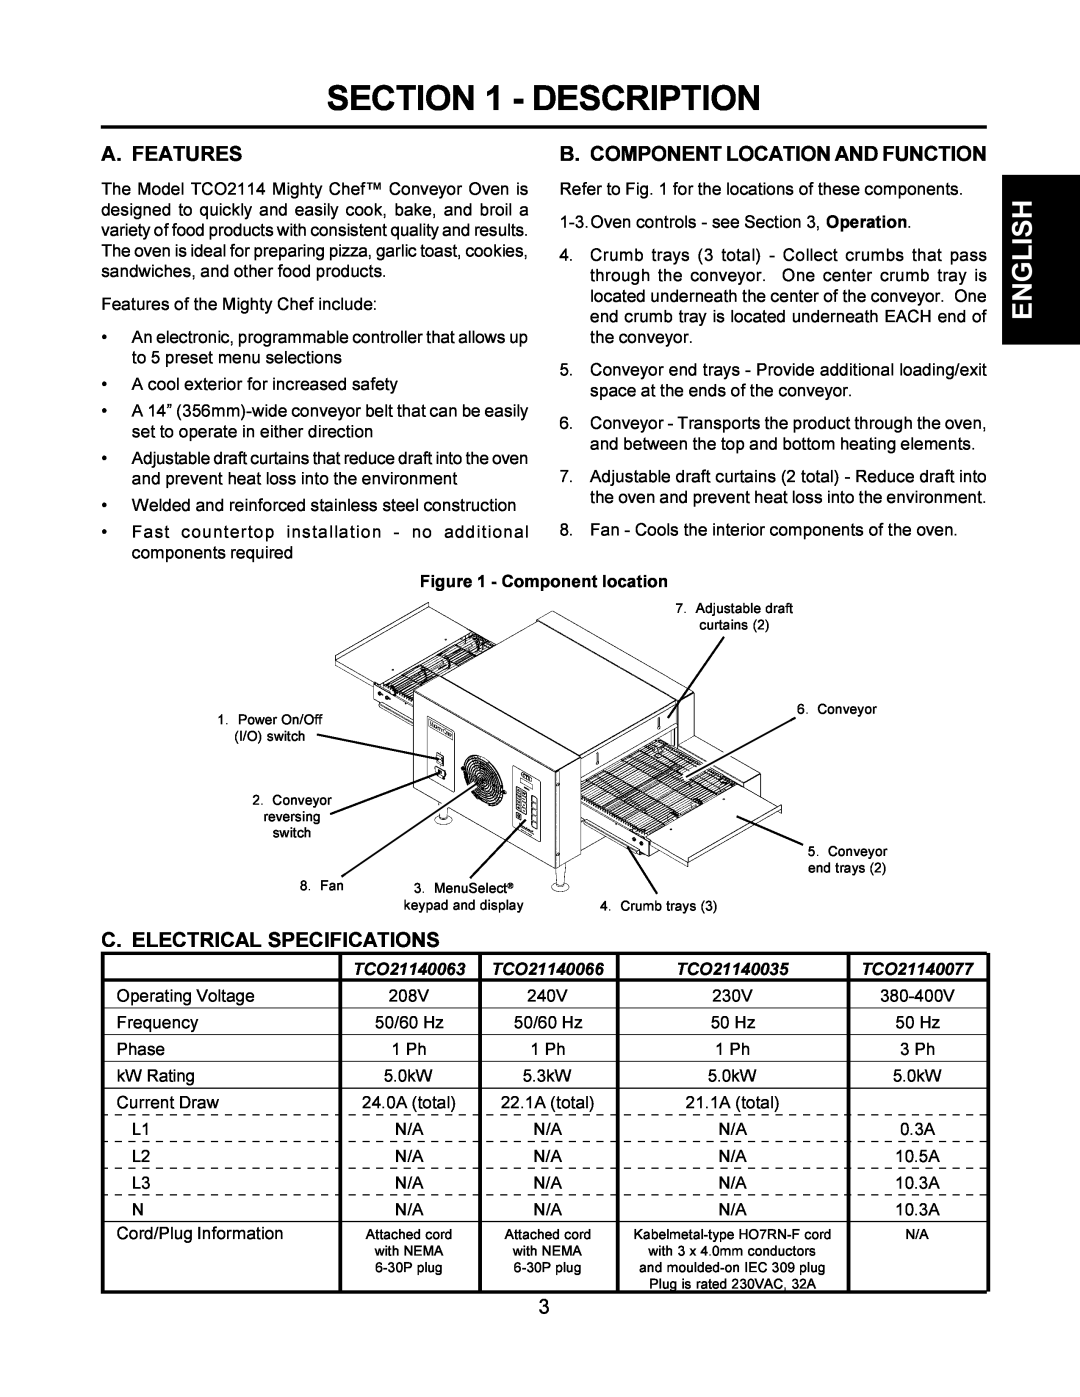 Middleby Cooking Systems Group TCO21140066 Description, A. Features, C. Electrical Specifications, Component location 